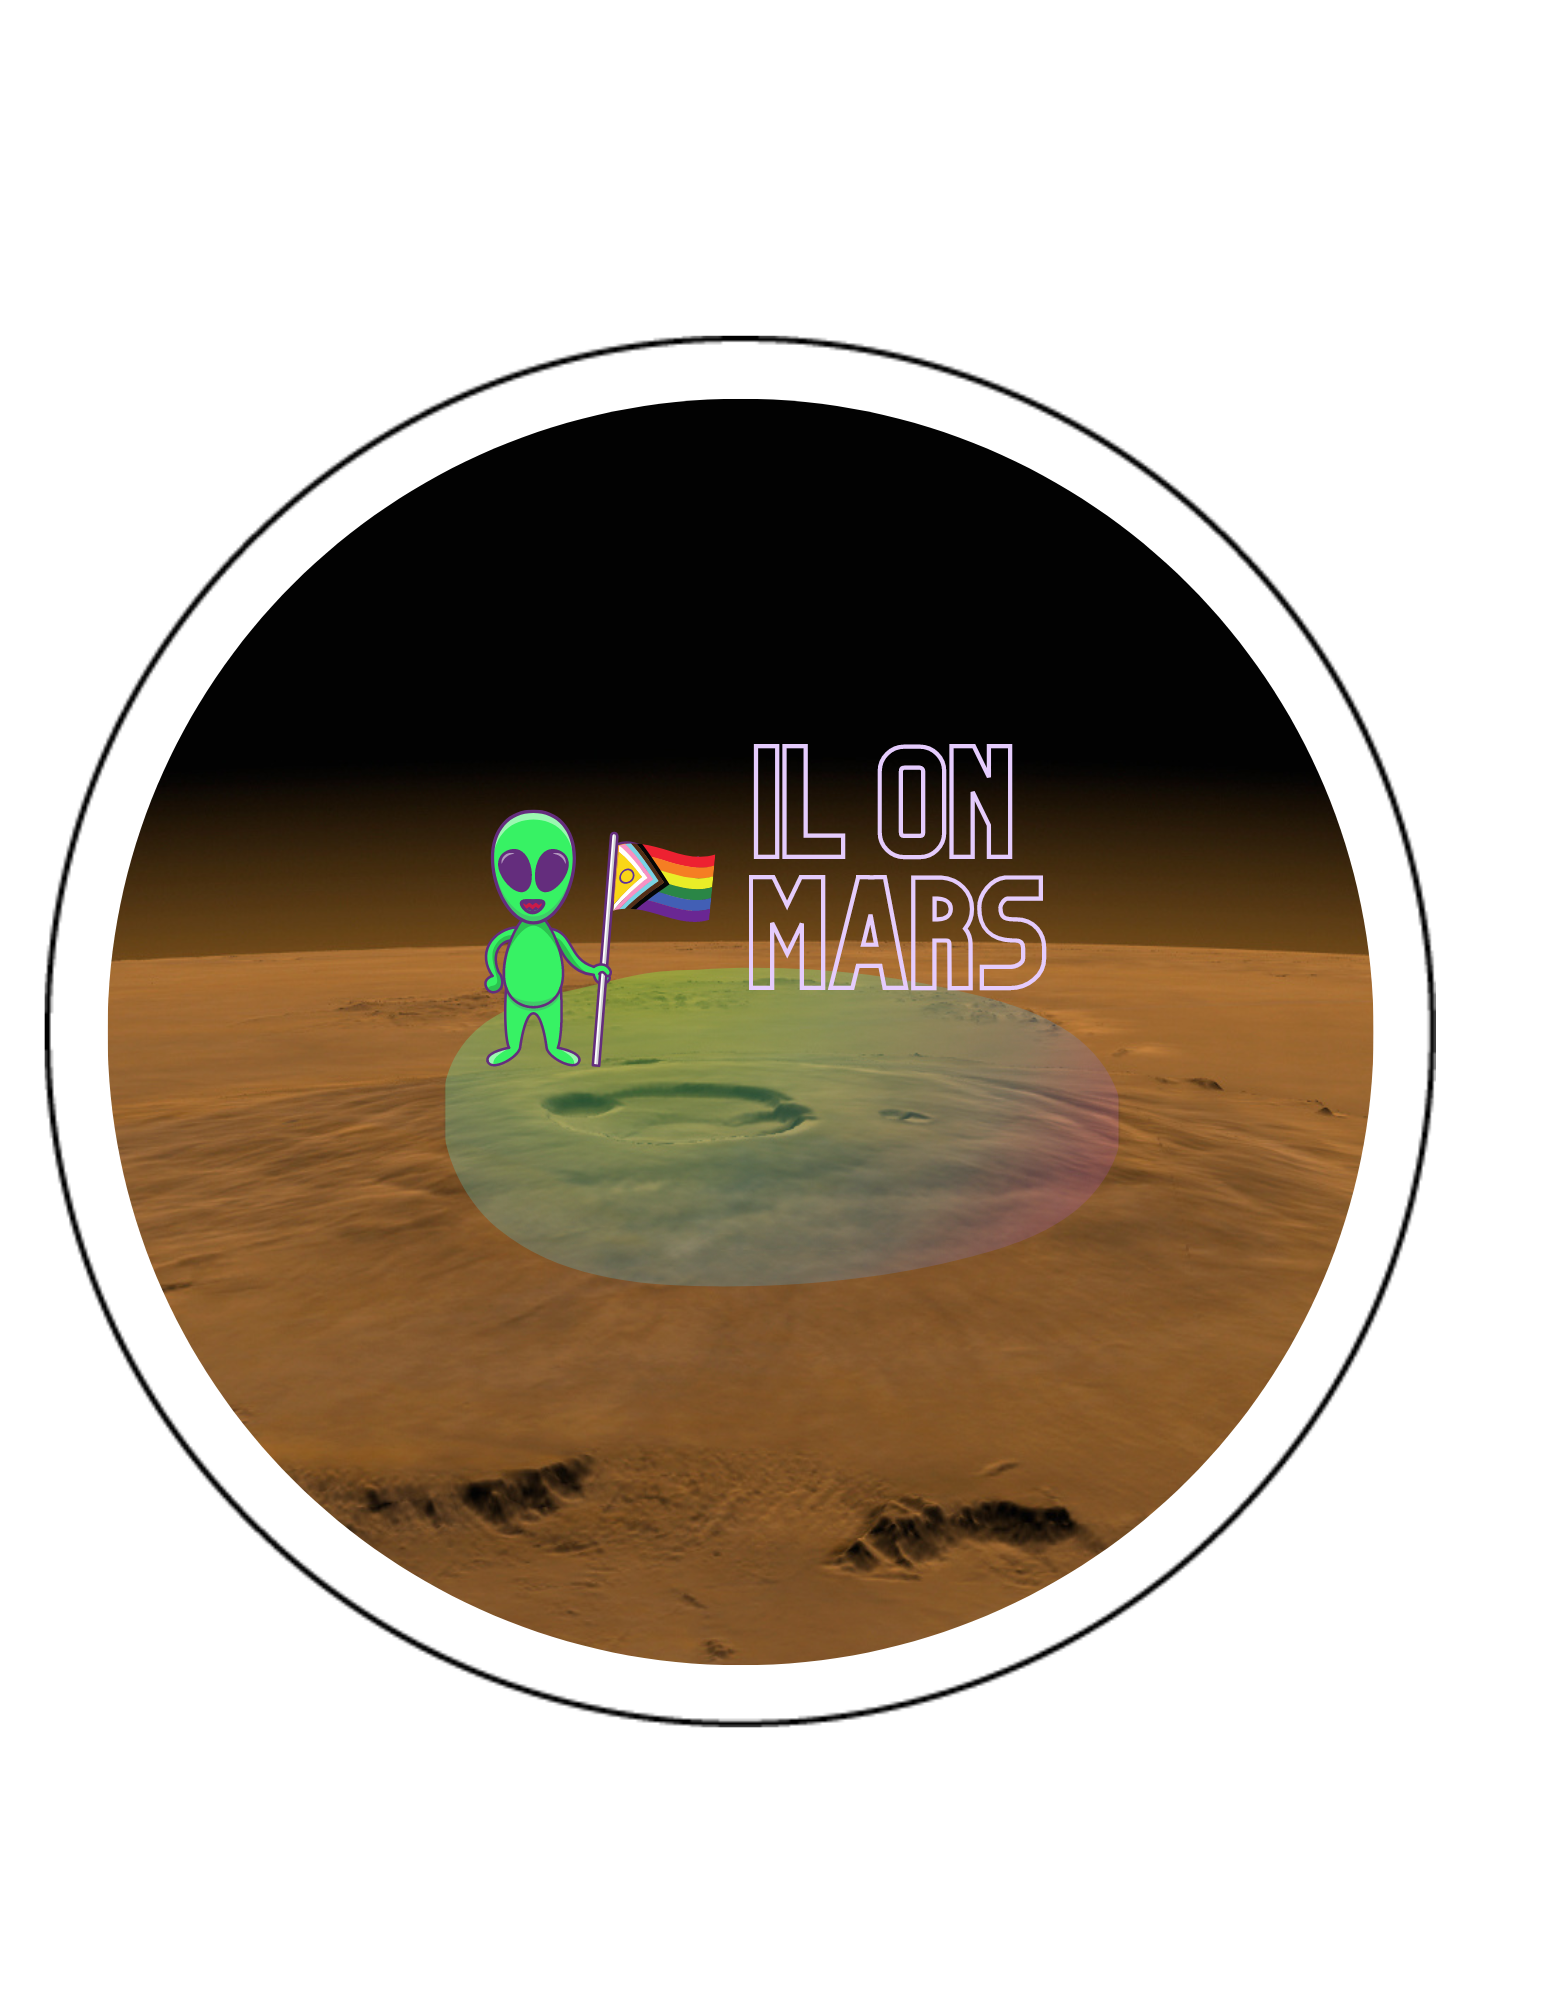 image of a green alien standing on Mars holding an LGBTQ pride flag. The words "IL on Mars" are written next to the alien.